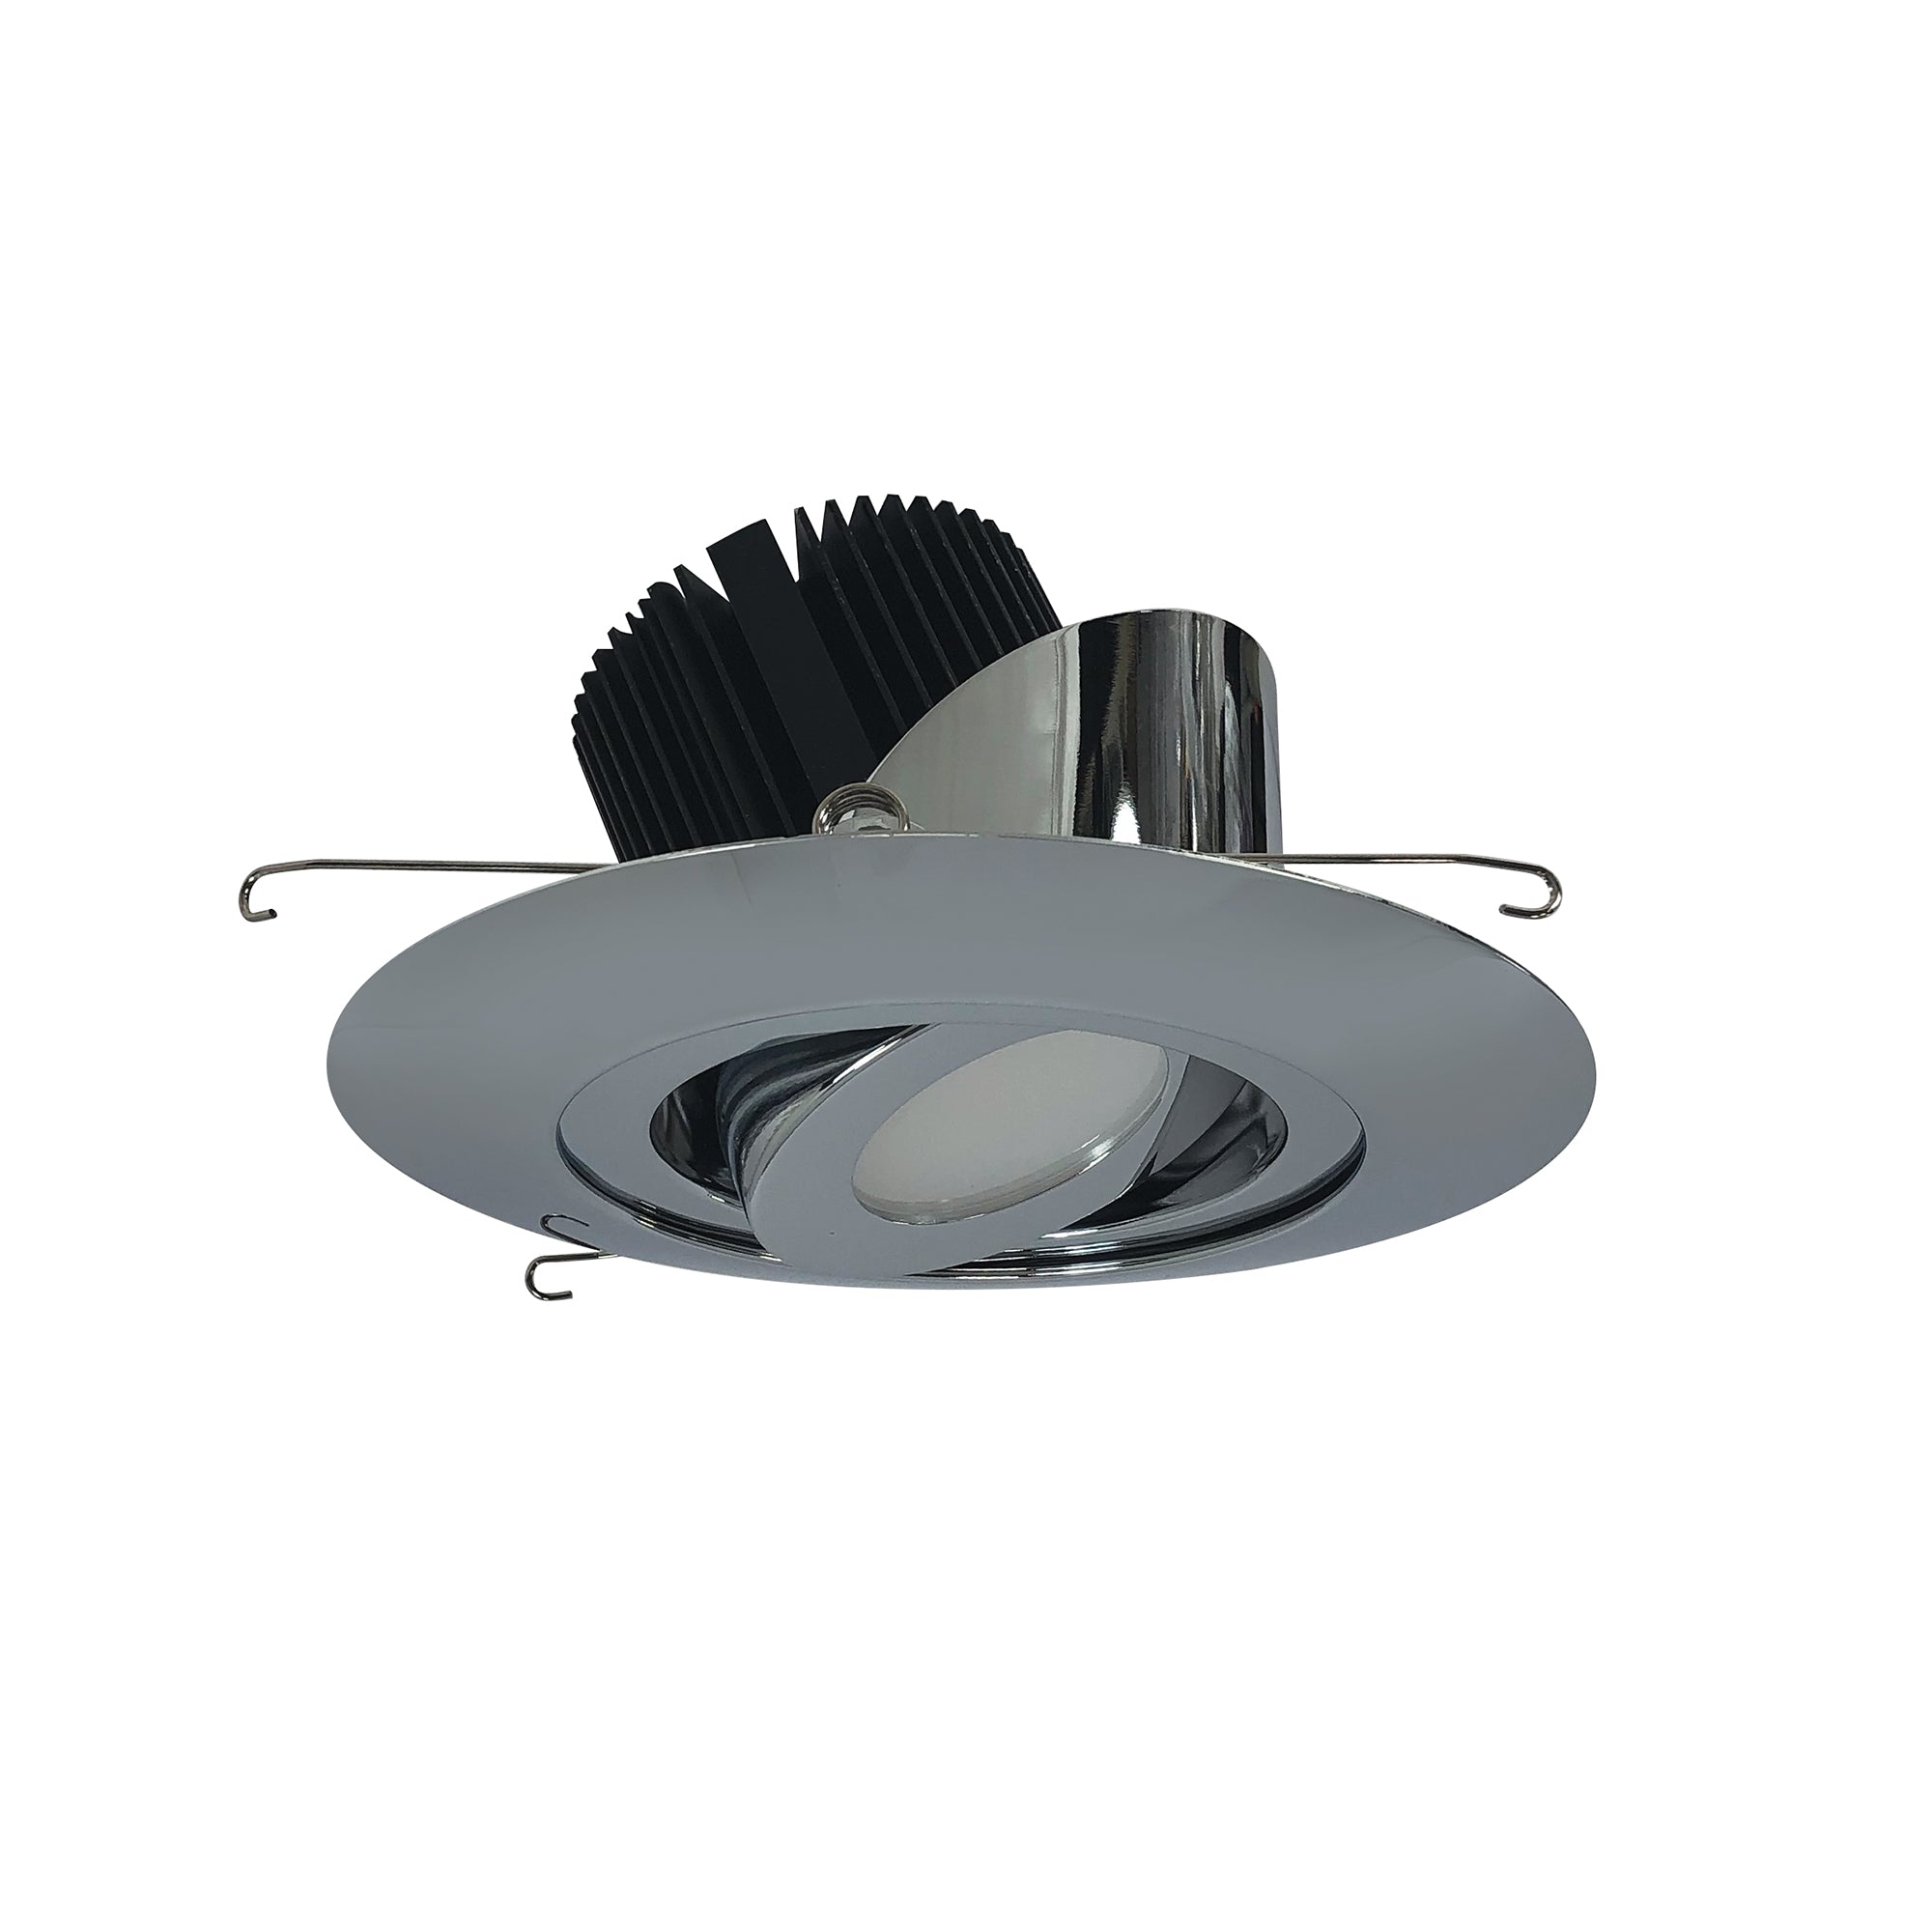 Nora Lighting NRM2-614L2530SC - Recessed - 6 Inch Marquise II Round Surface Adjustable Trim, Spot, 2500lm, 3000K, Chrome (Not Compatible with NHRM2-625 Housings)